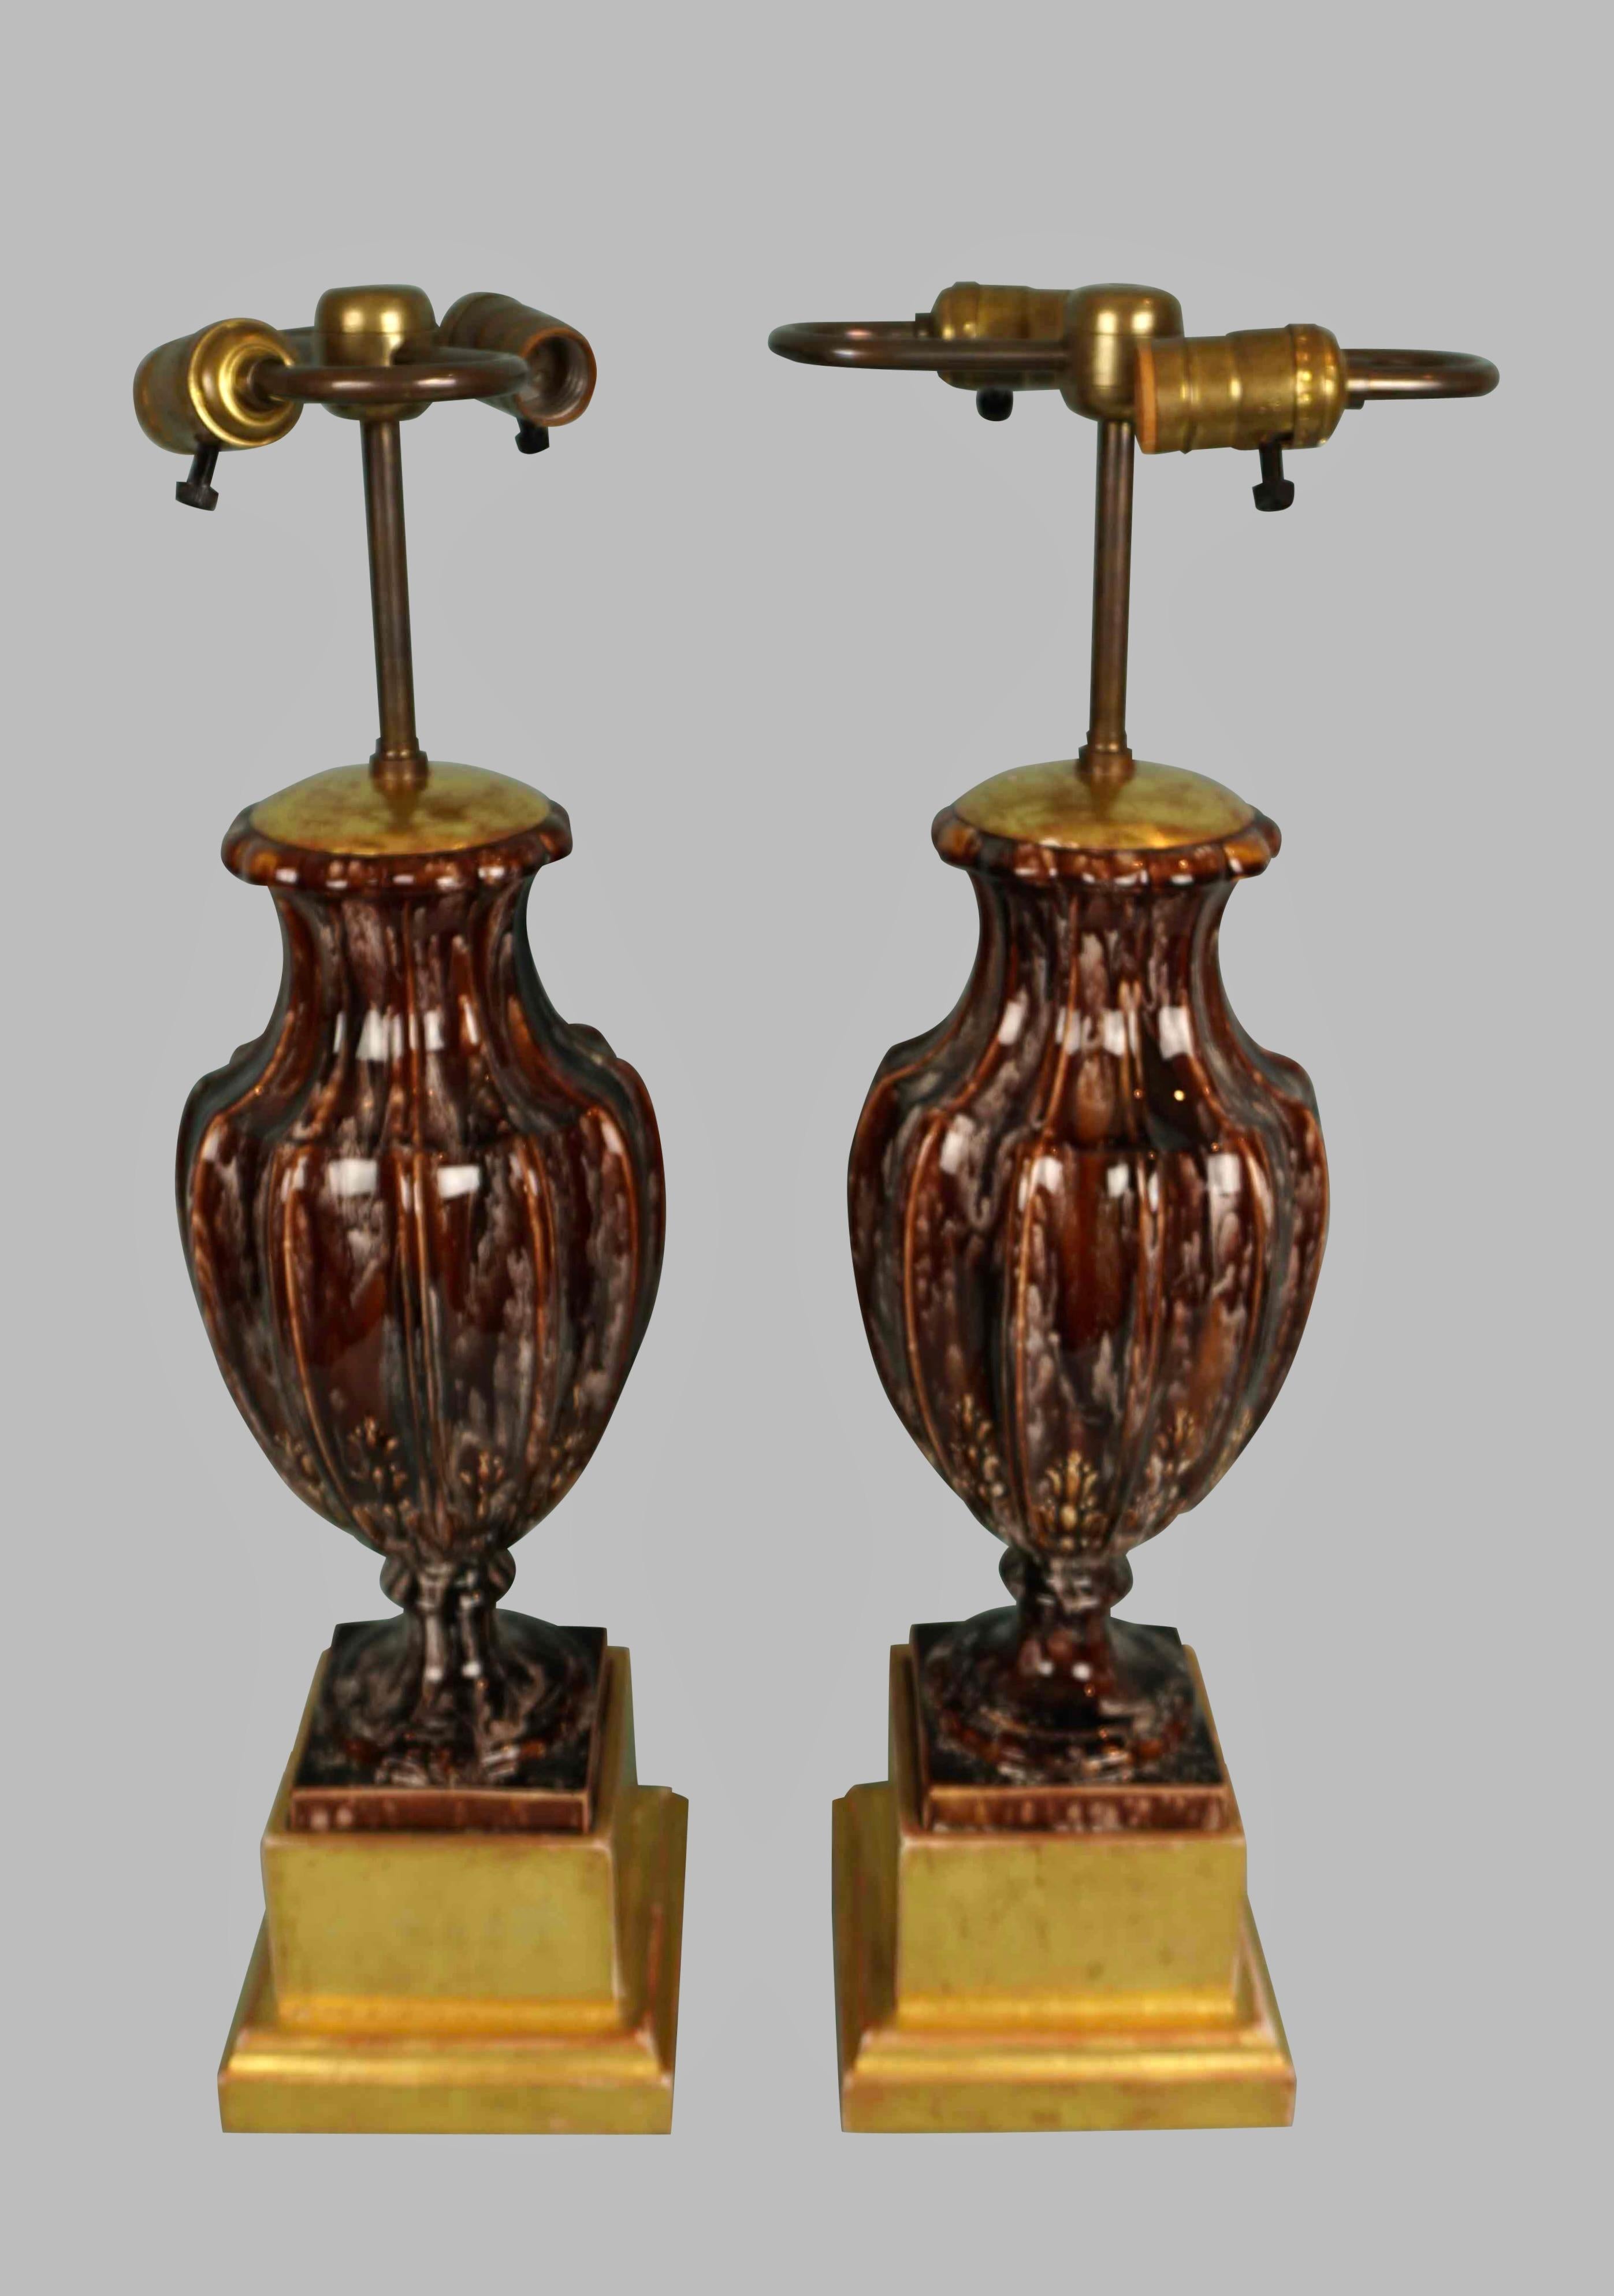 An attractive and unusual pair of brown and cream decorated porcelain or earthenware neoclassical style fluted vases with incised details now electrified and mounted on custom gilt bases. Probably made in the first quarter of the 20th century.